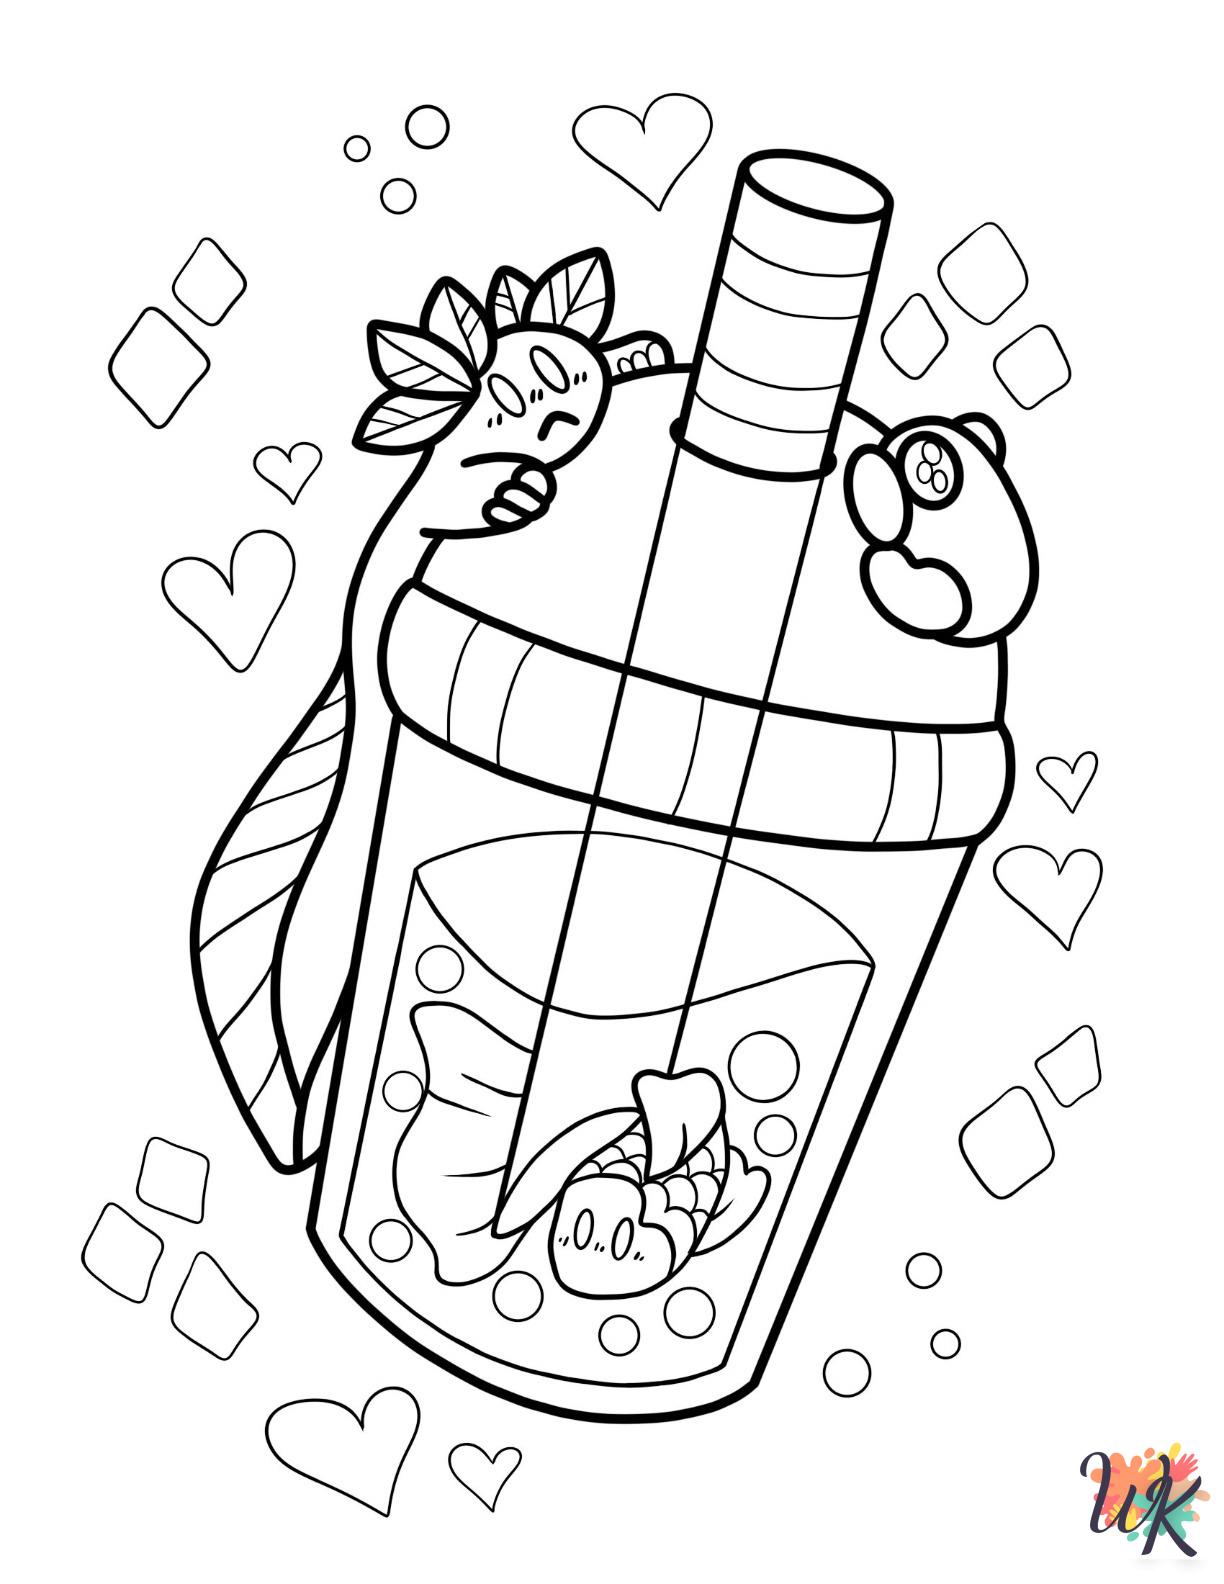 Boba Tea free coloring pages